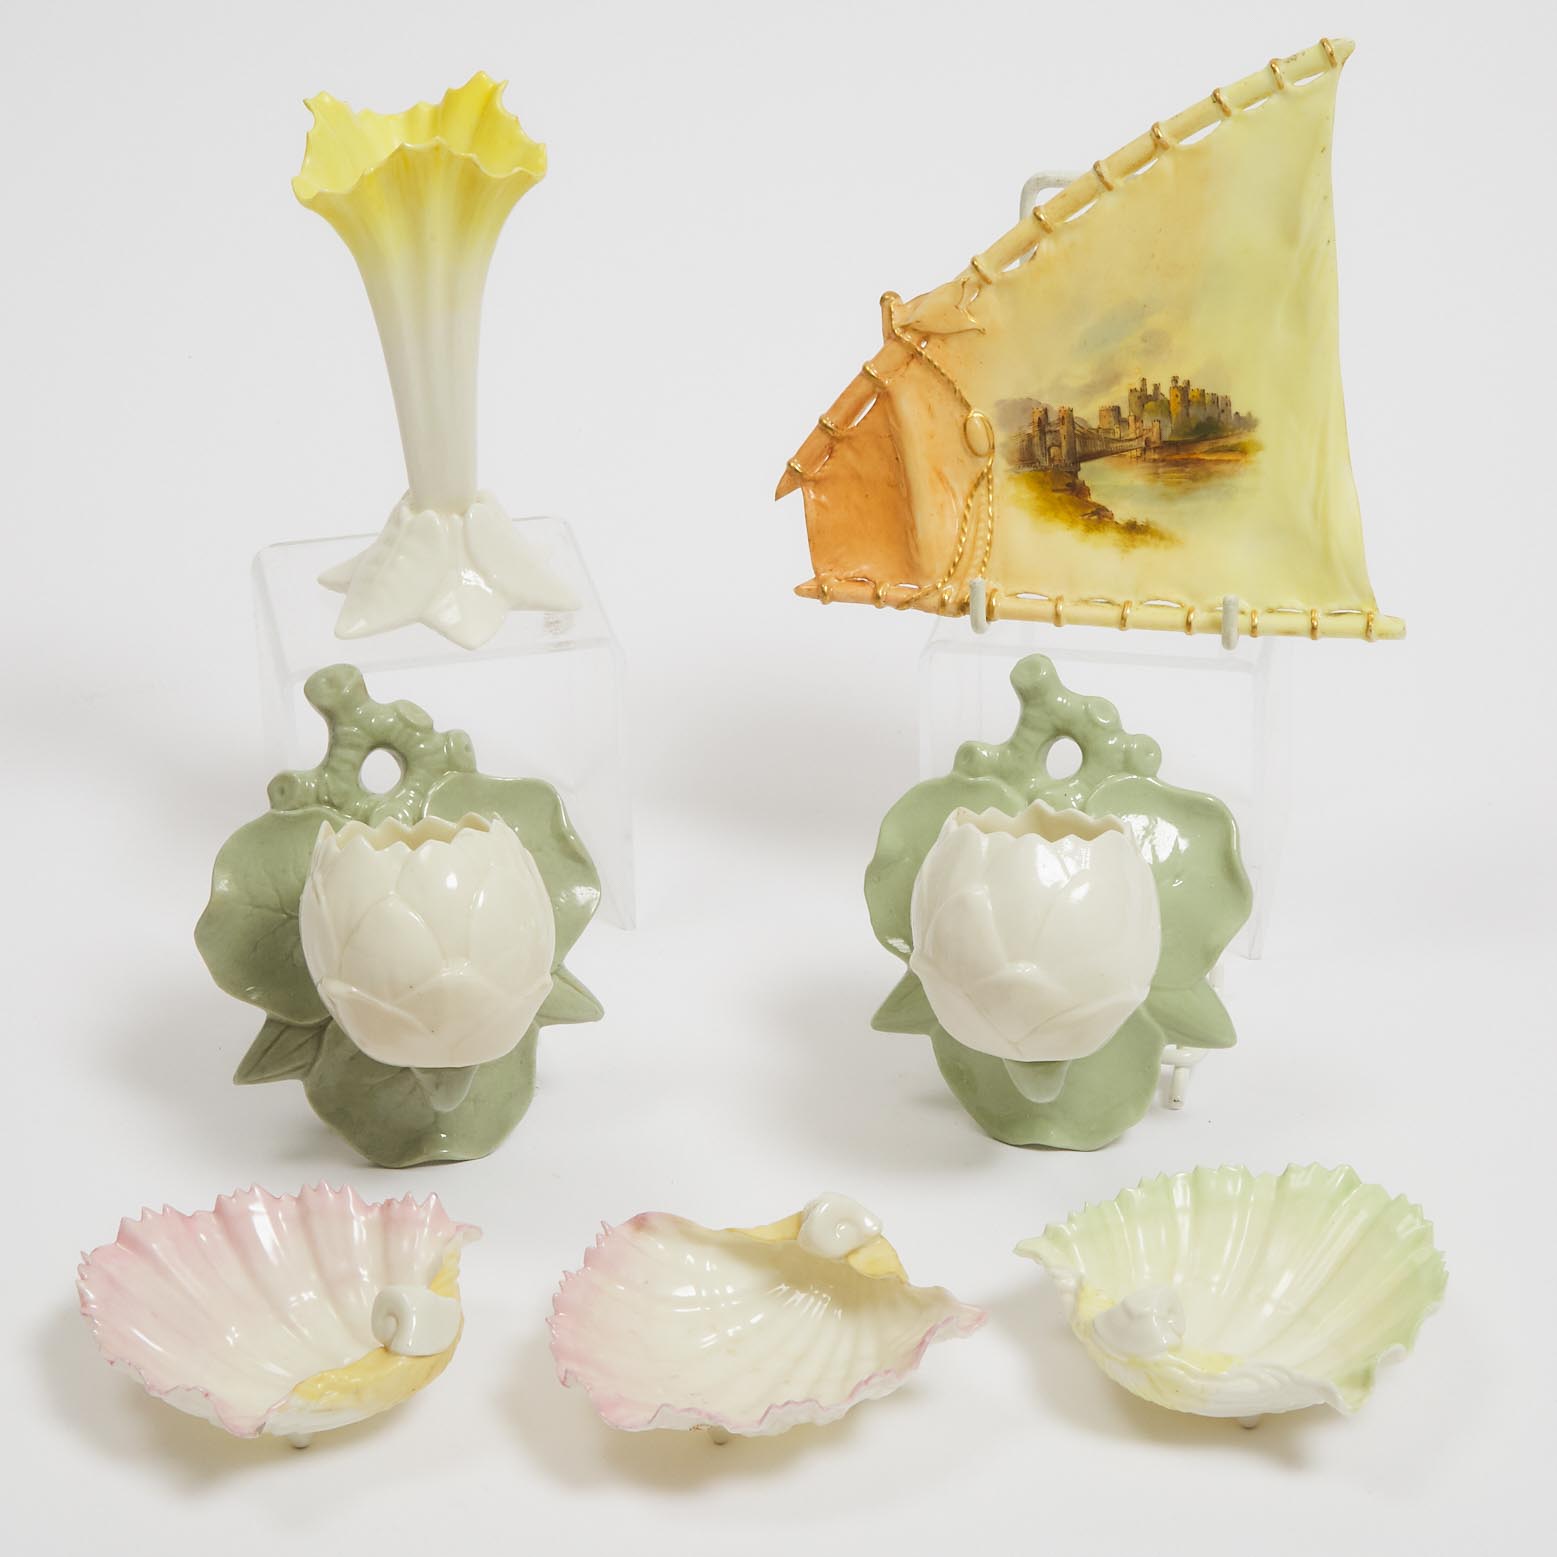 Pair of Grainger & Co. Worcester Moulded Lily Wall Pockets, a Vase, Three Small Shell Dishes and a 'Conway Castle' Sail-Form Dish, c.1885-1902